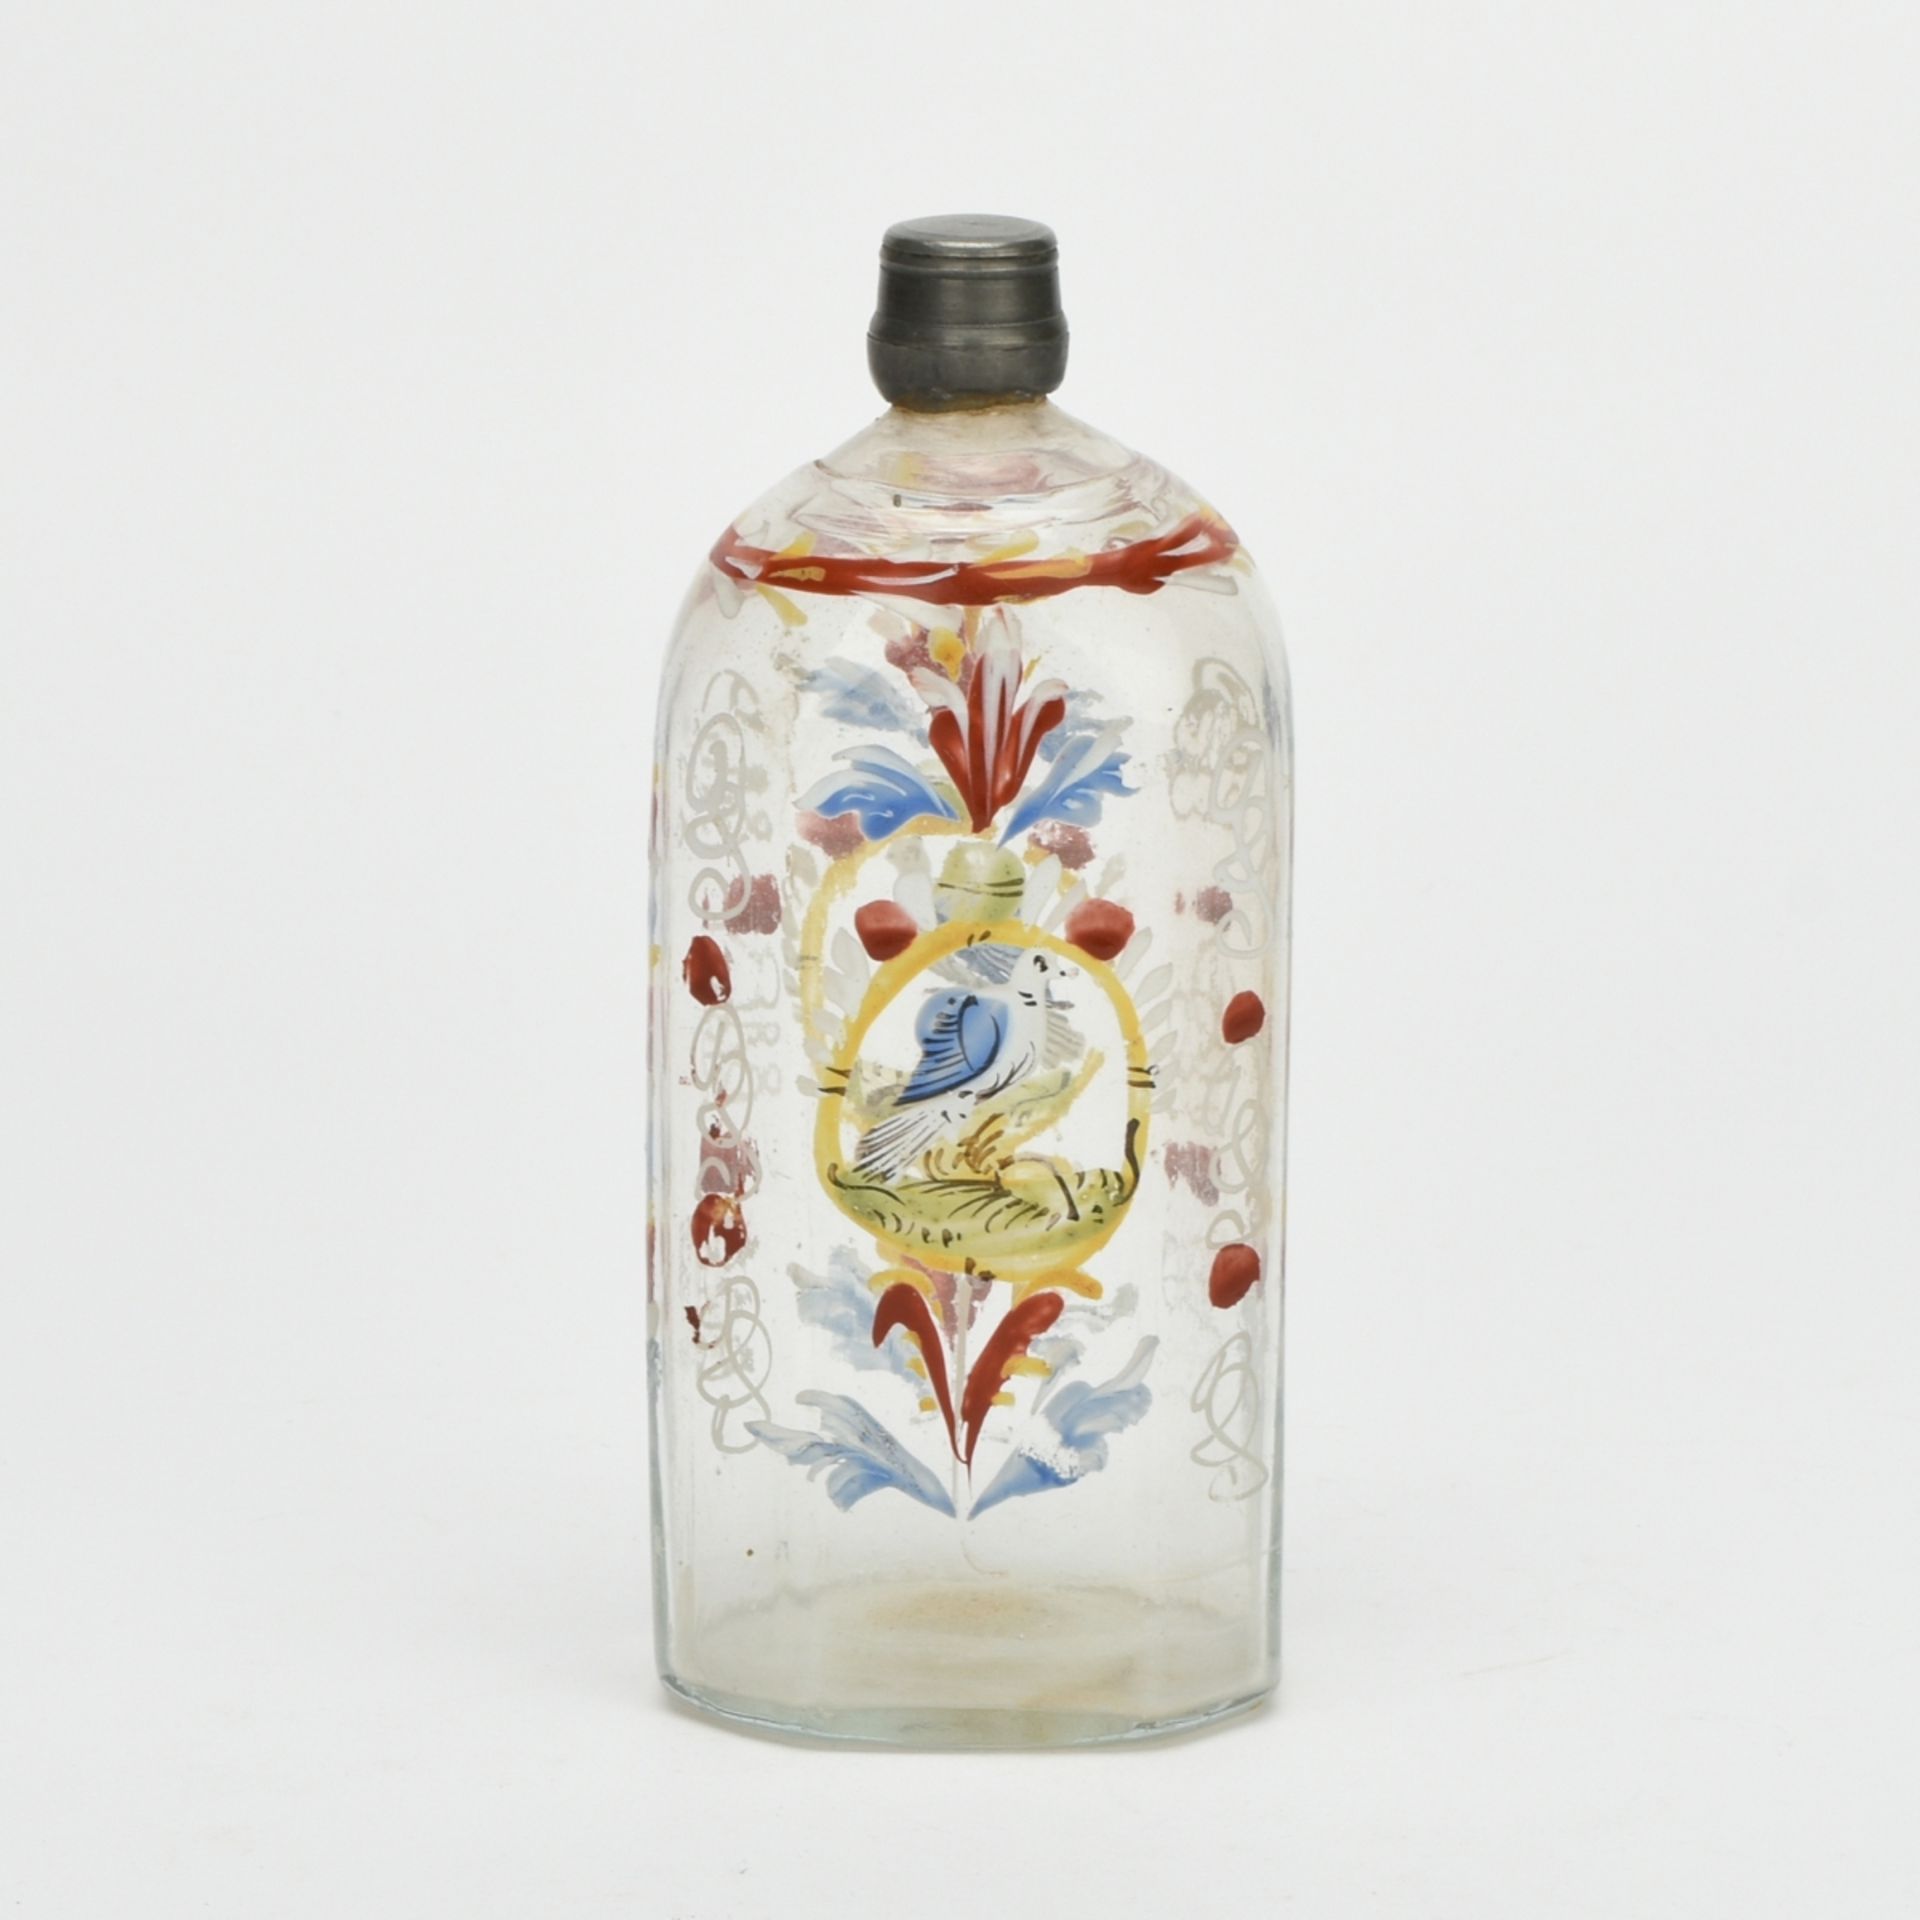 Schnapsflasche 18. Jh. - Image 2 of 5